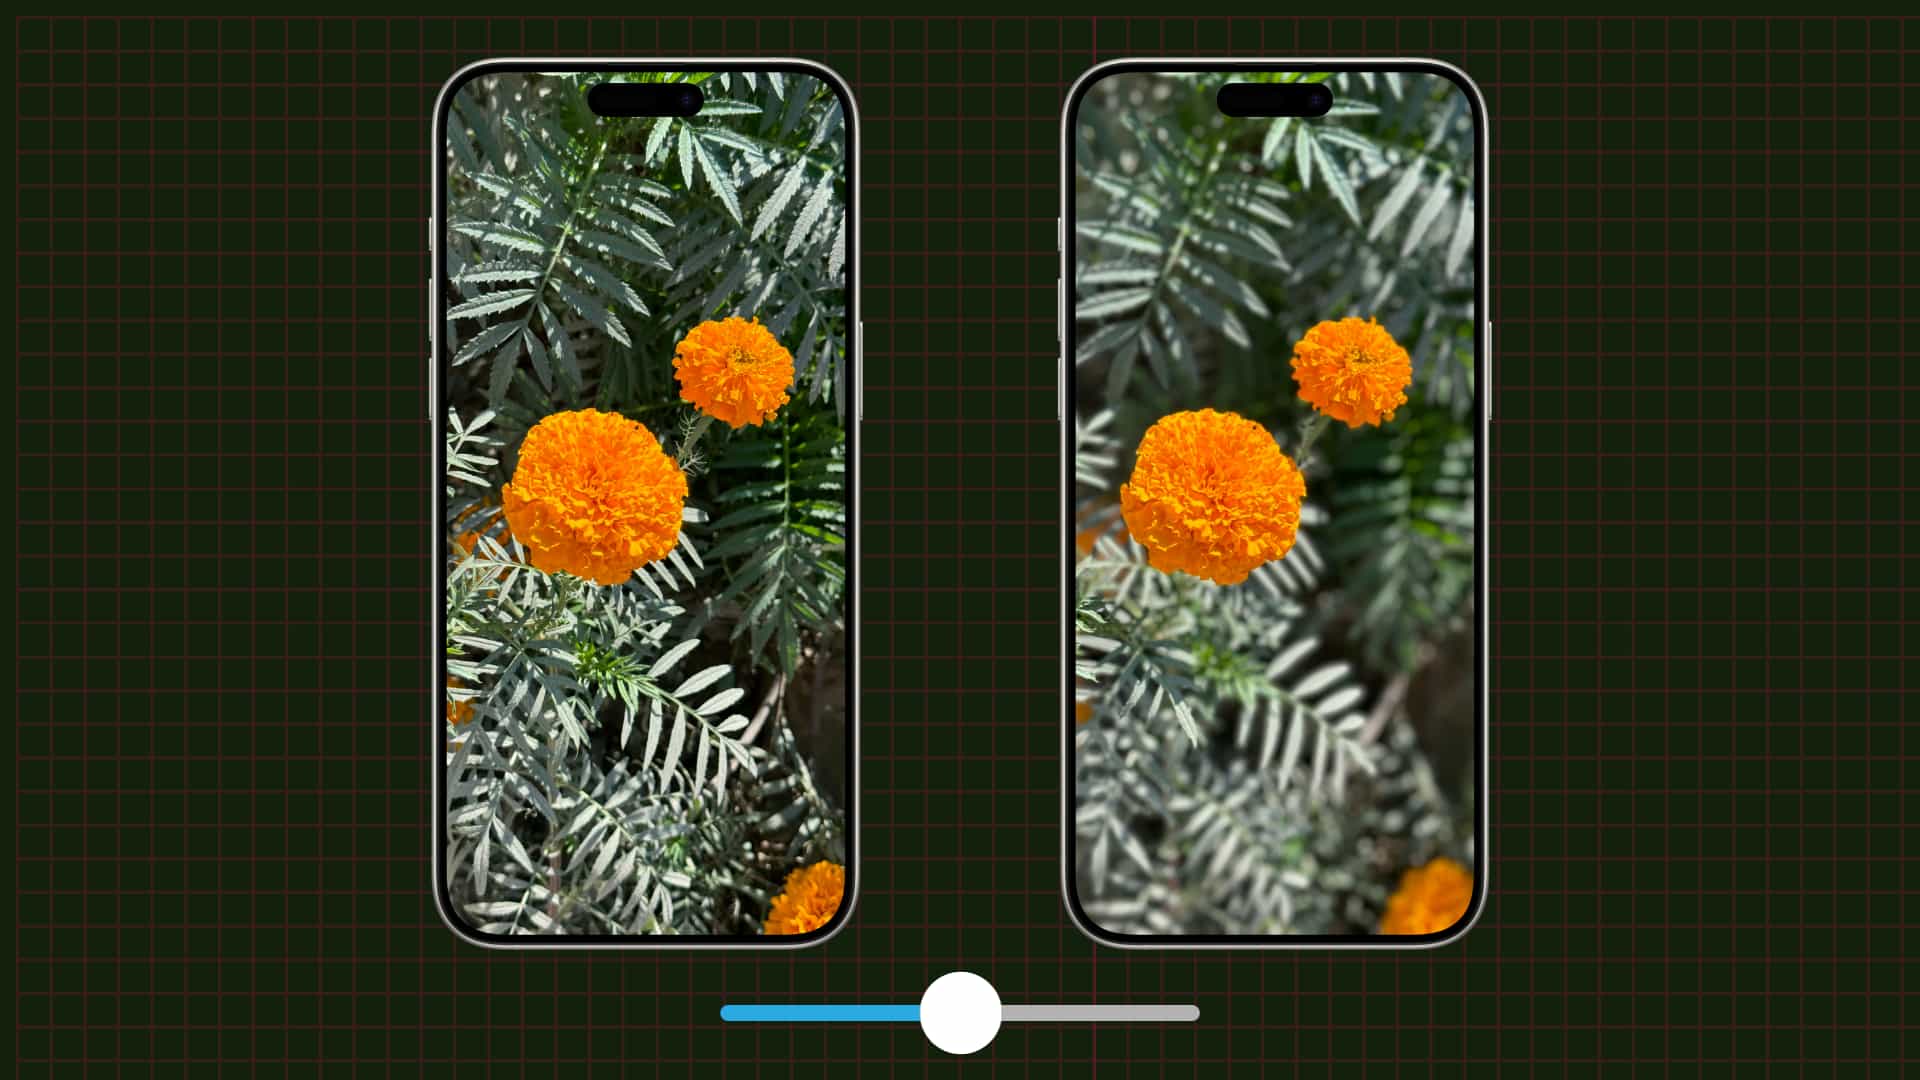 How to adjust the background blur of a photo on iPhone